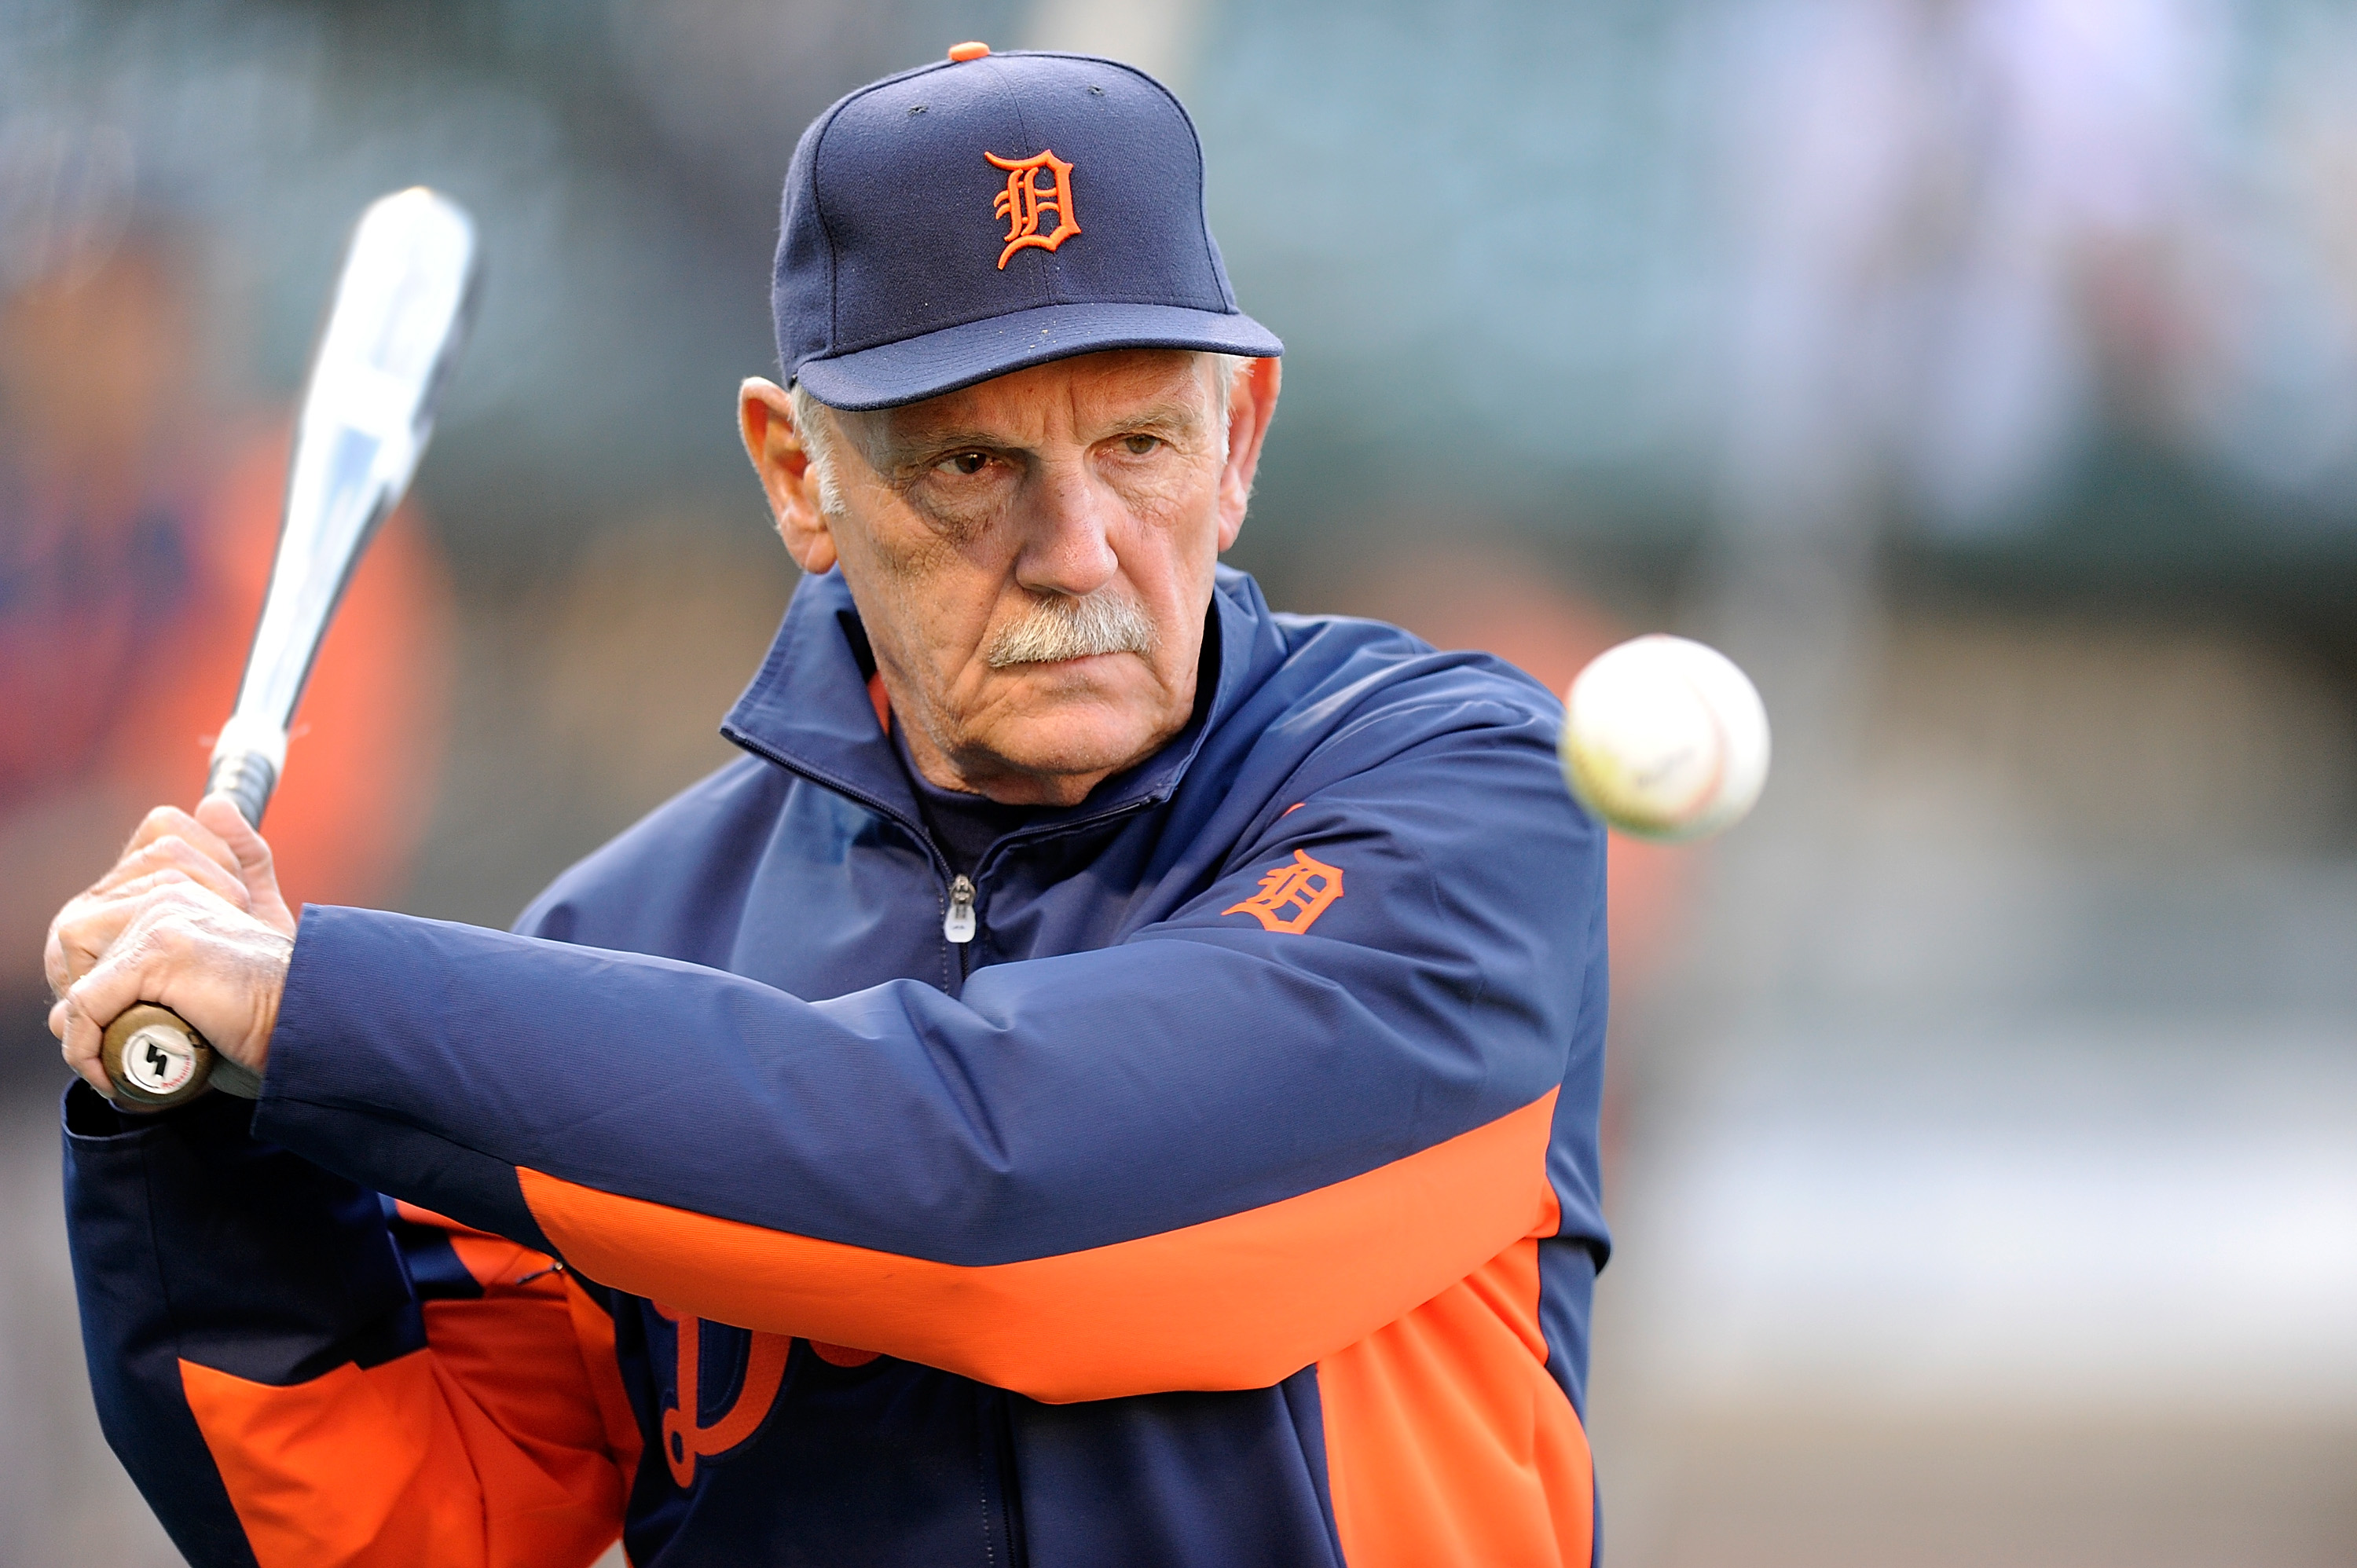 He may be older, but Jim Leyland is still youthful at heart.